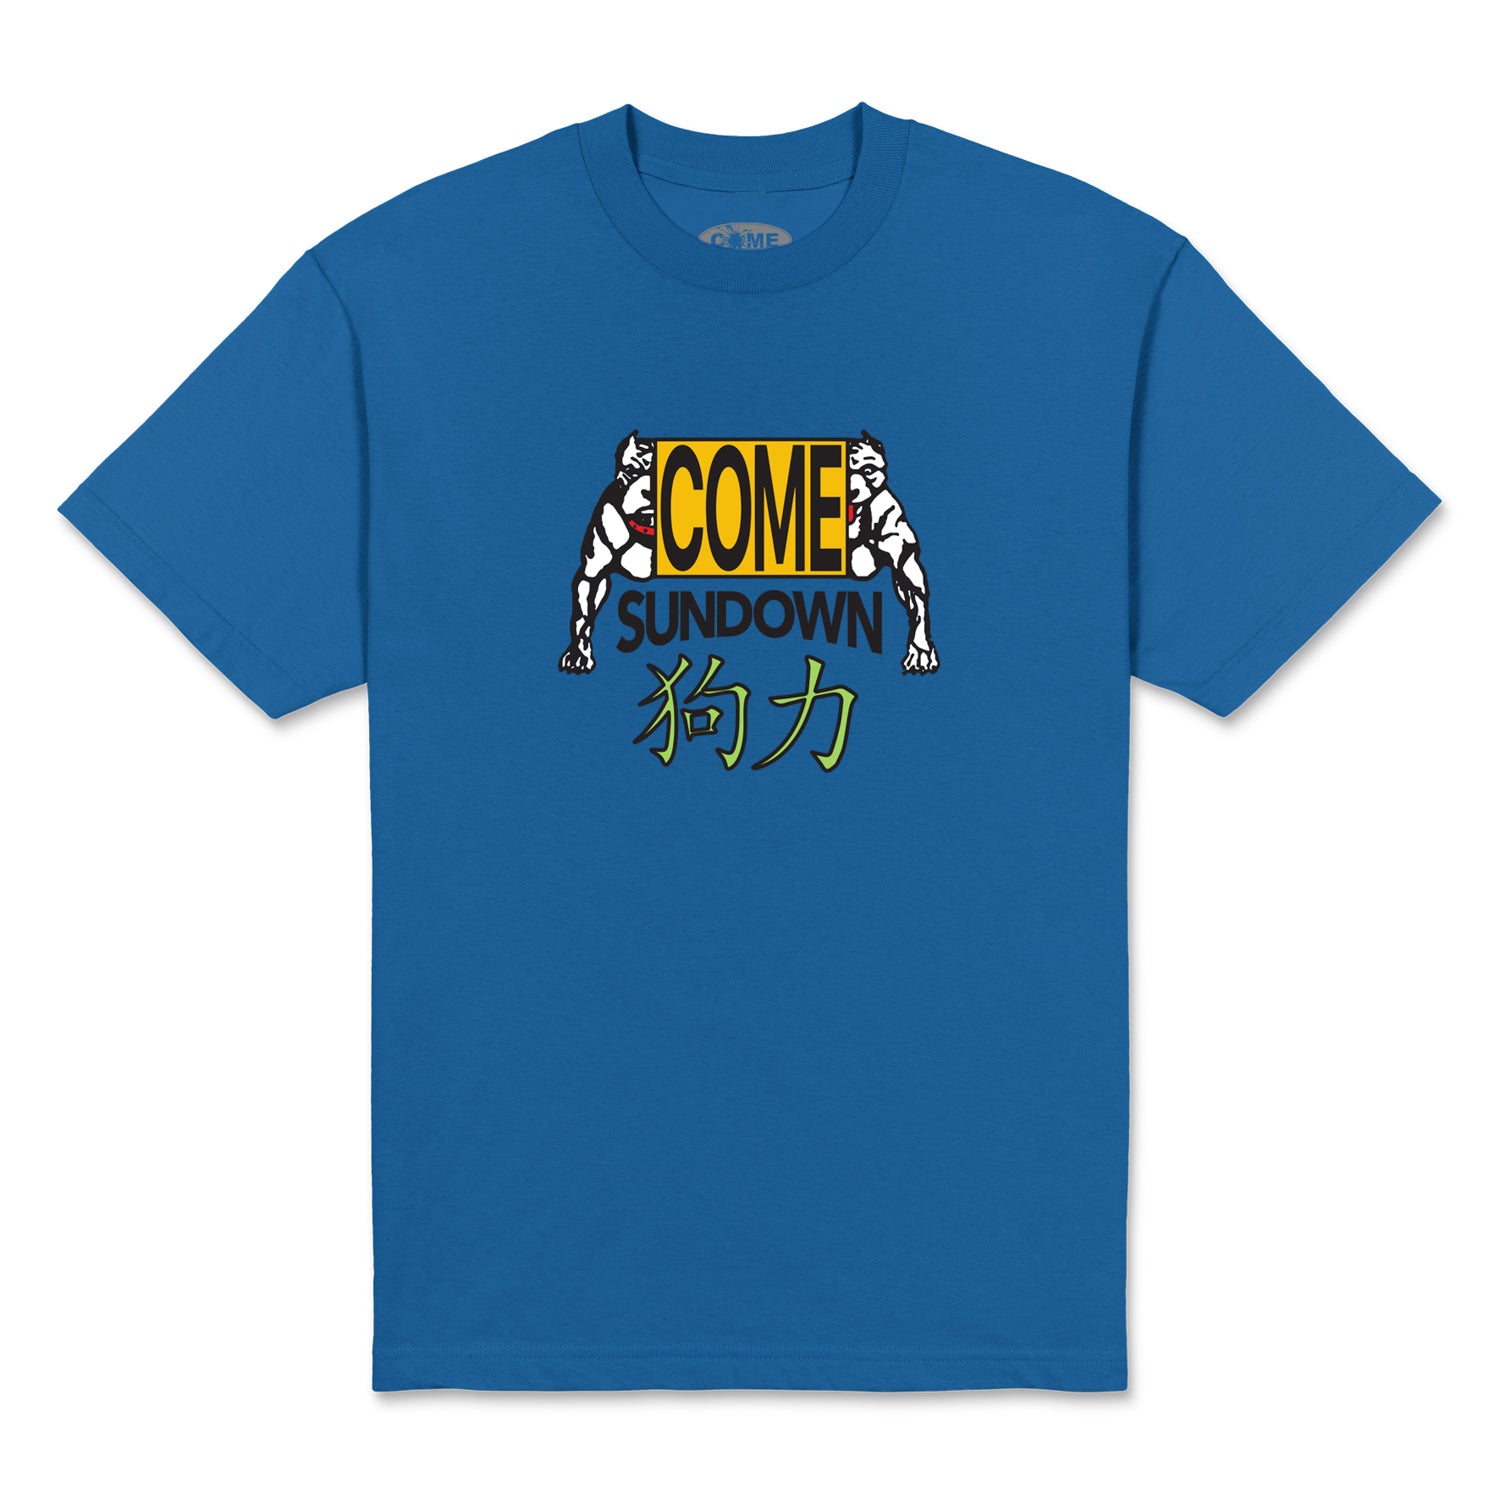 Year Of The Dog Tee, Royal Blue